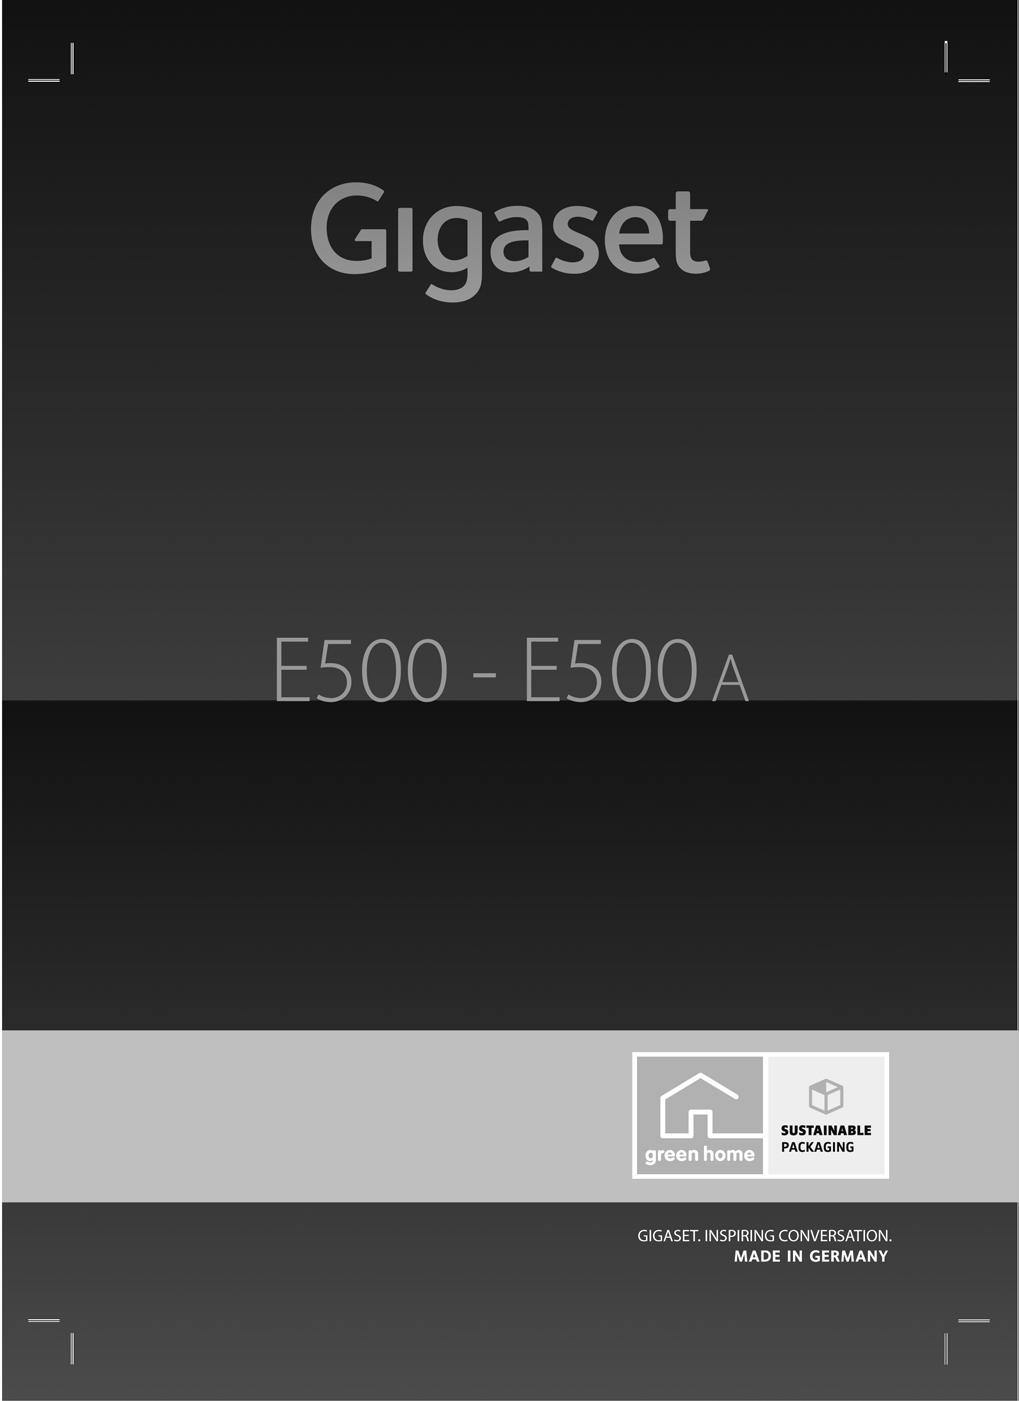 Congratulations By purchasing a Gigaset, you have chosen a brand that is fully committed to